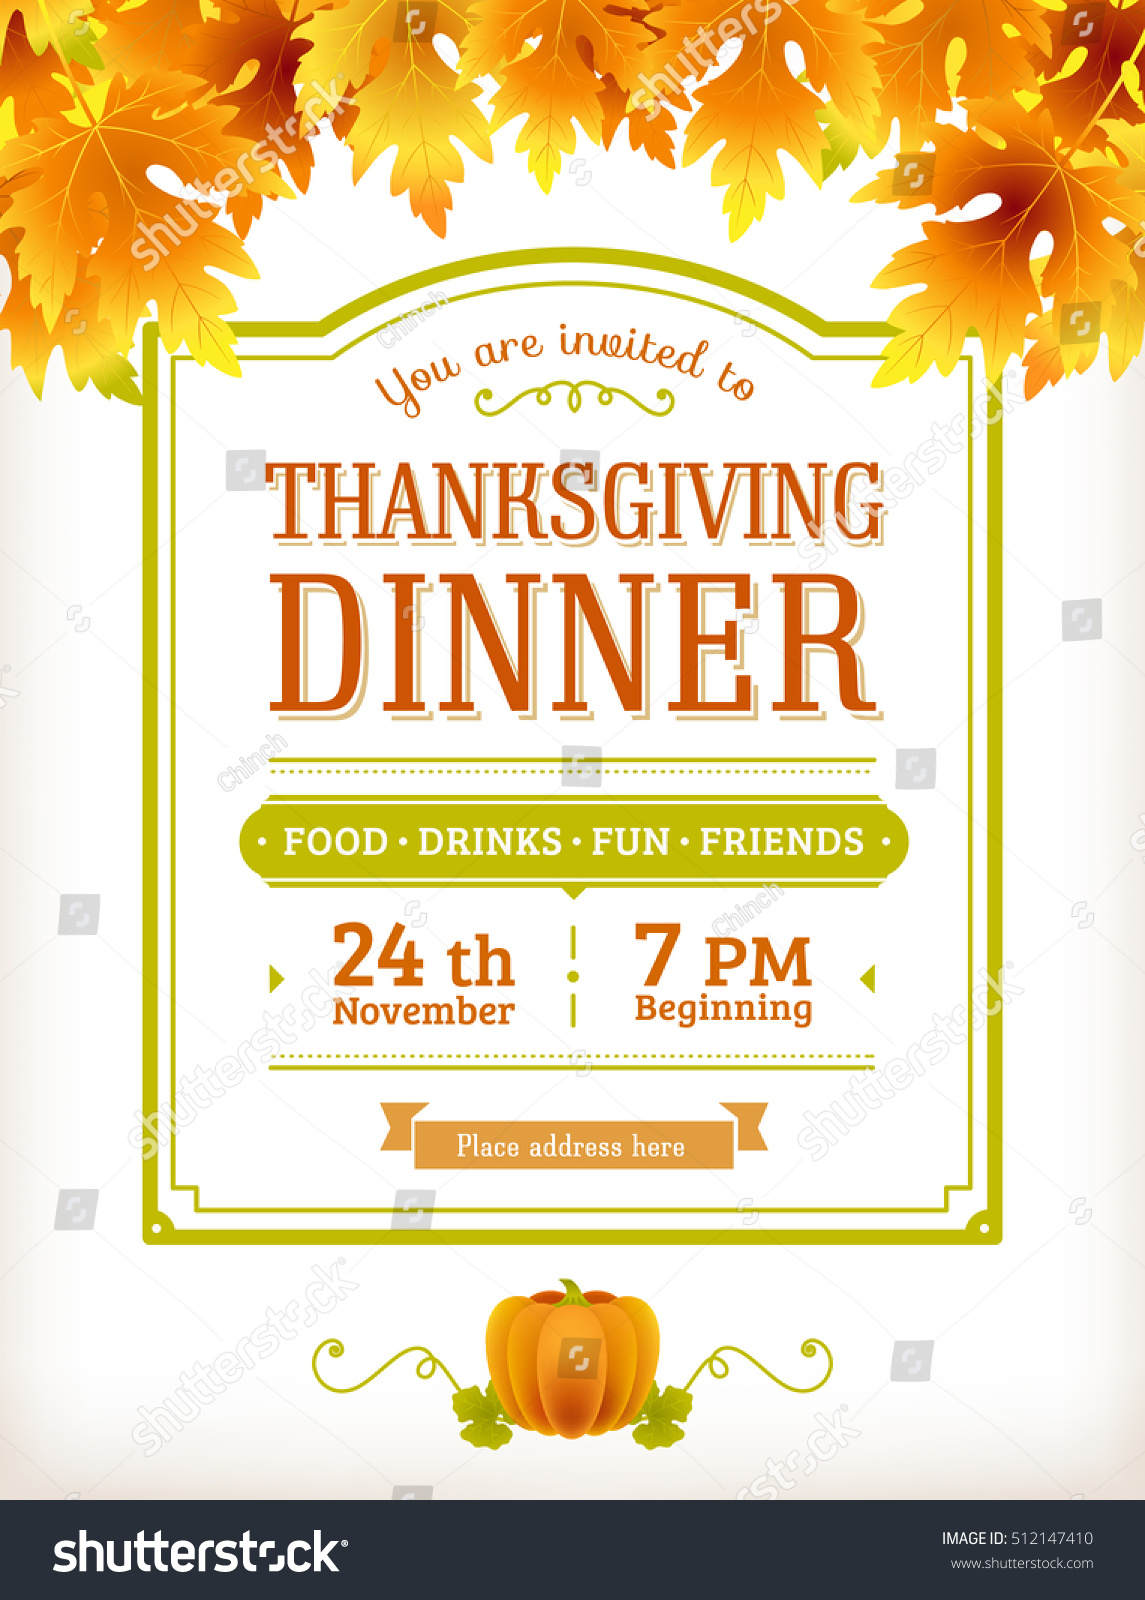 Invitation For Dinner Party Text Choice Image - Invitation 